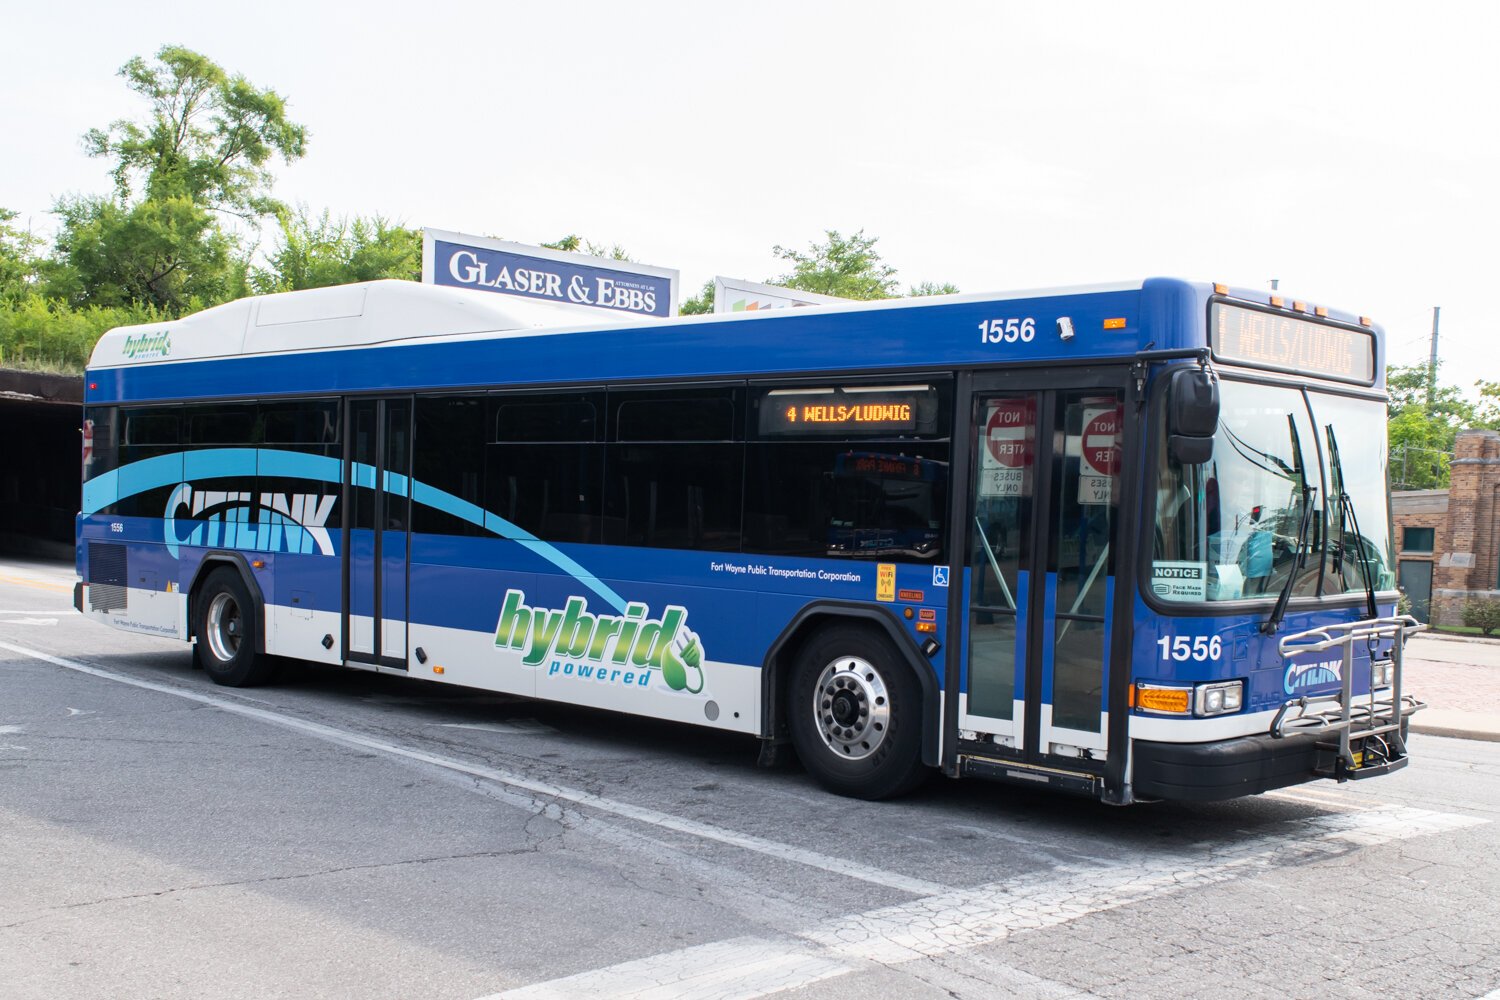 Almost all of Citilink's bus service in Fort Wayne is operating on a 60-minute frequency.